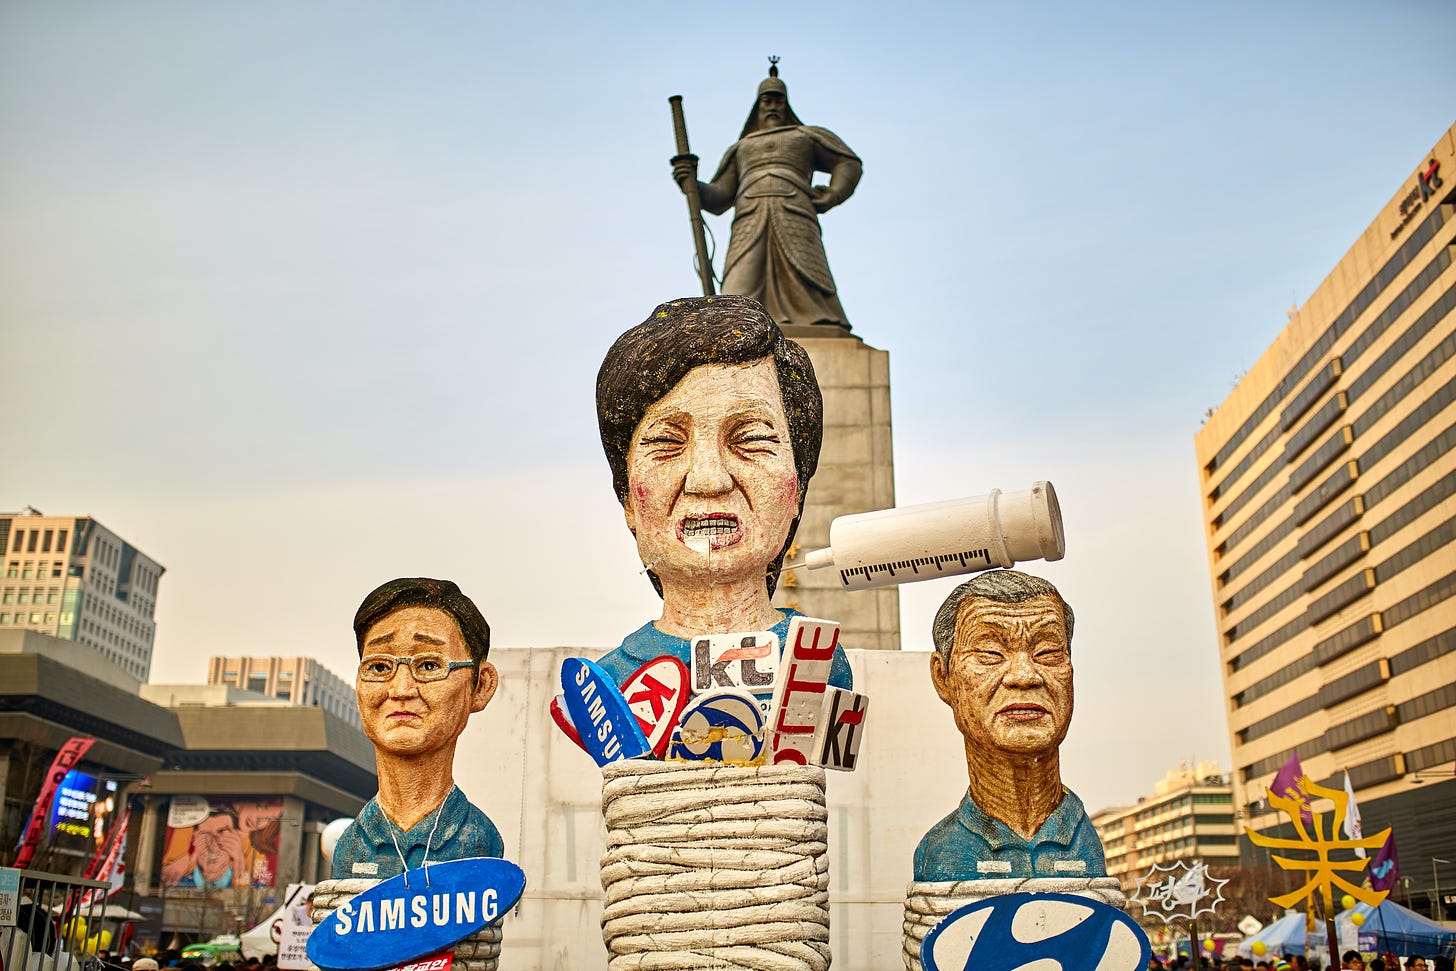 These were some sculptures created for the protest in seoul before the south korean president Park Geun Hye was impeached.